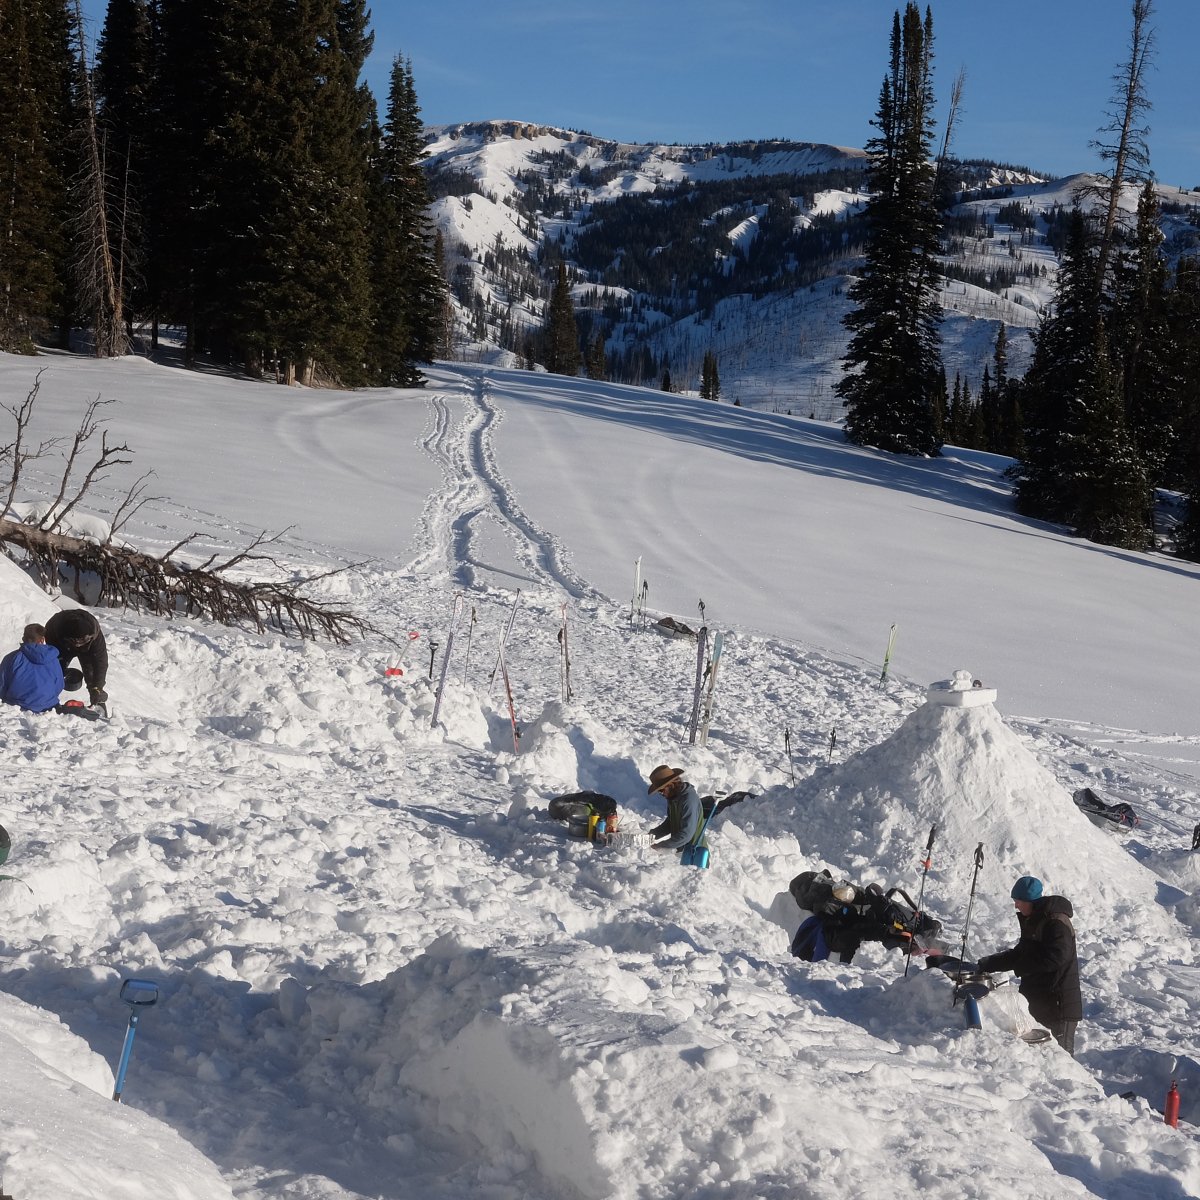 People building a snow shelter while backcountry touring